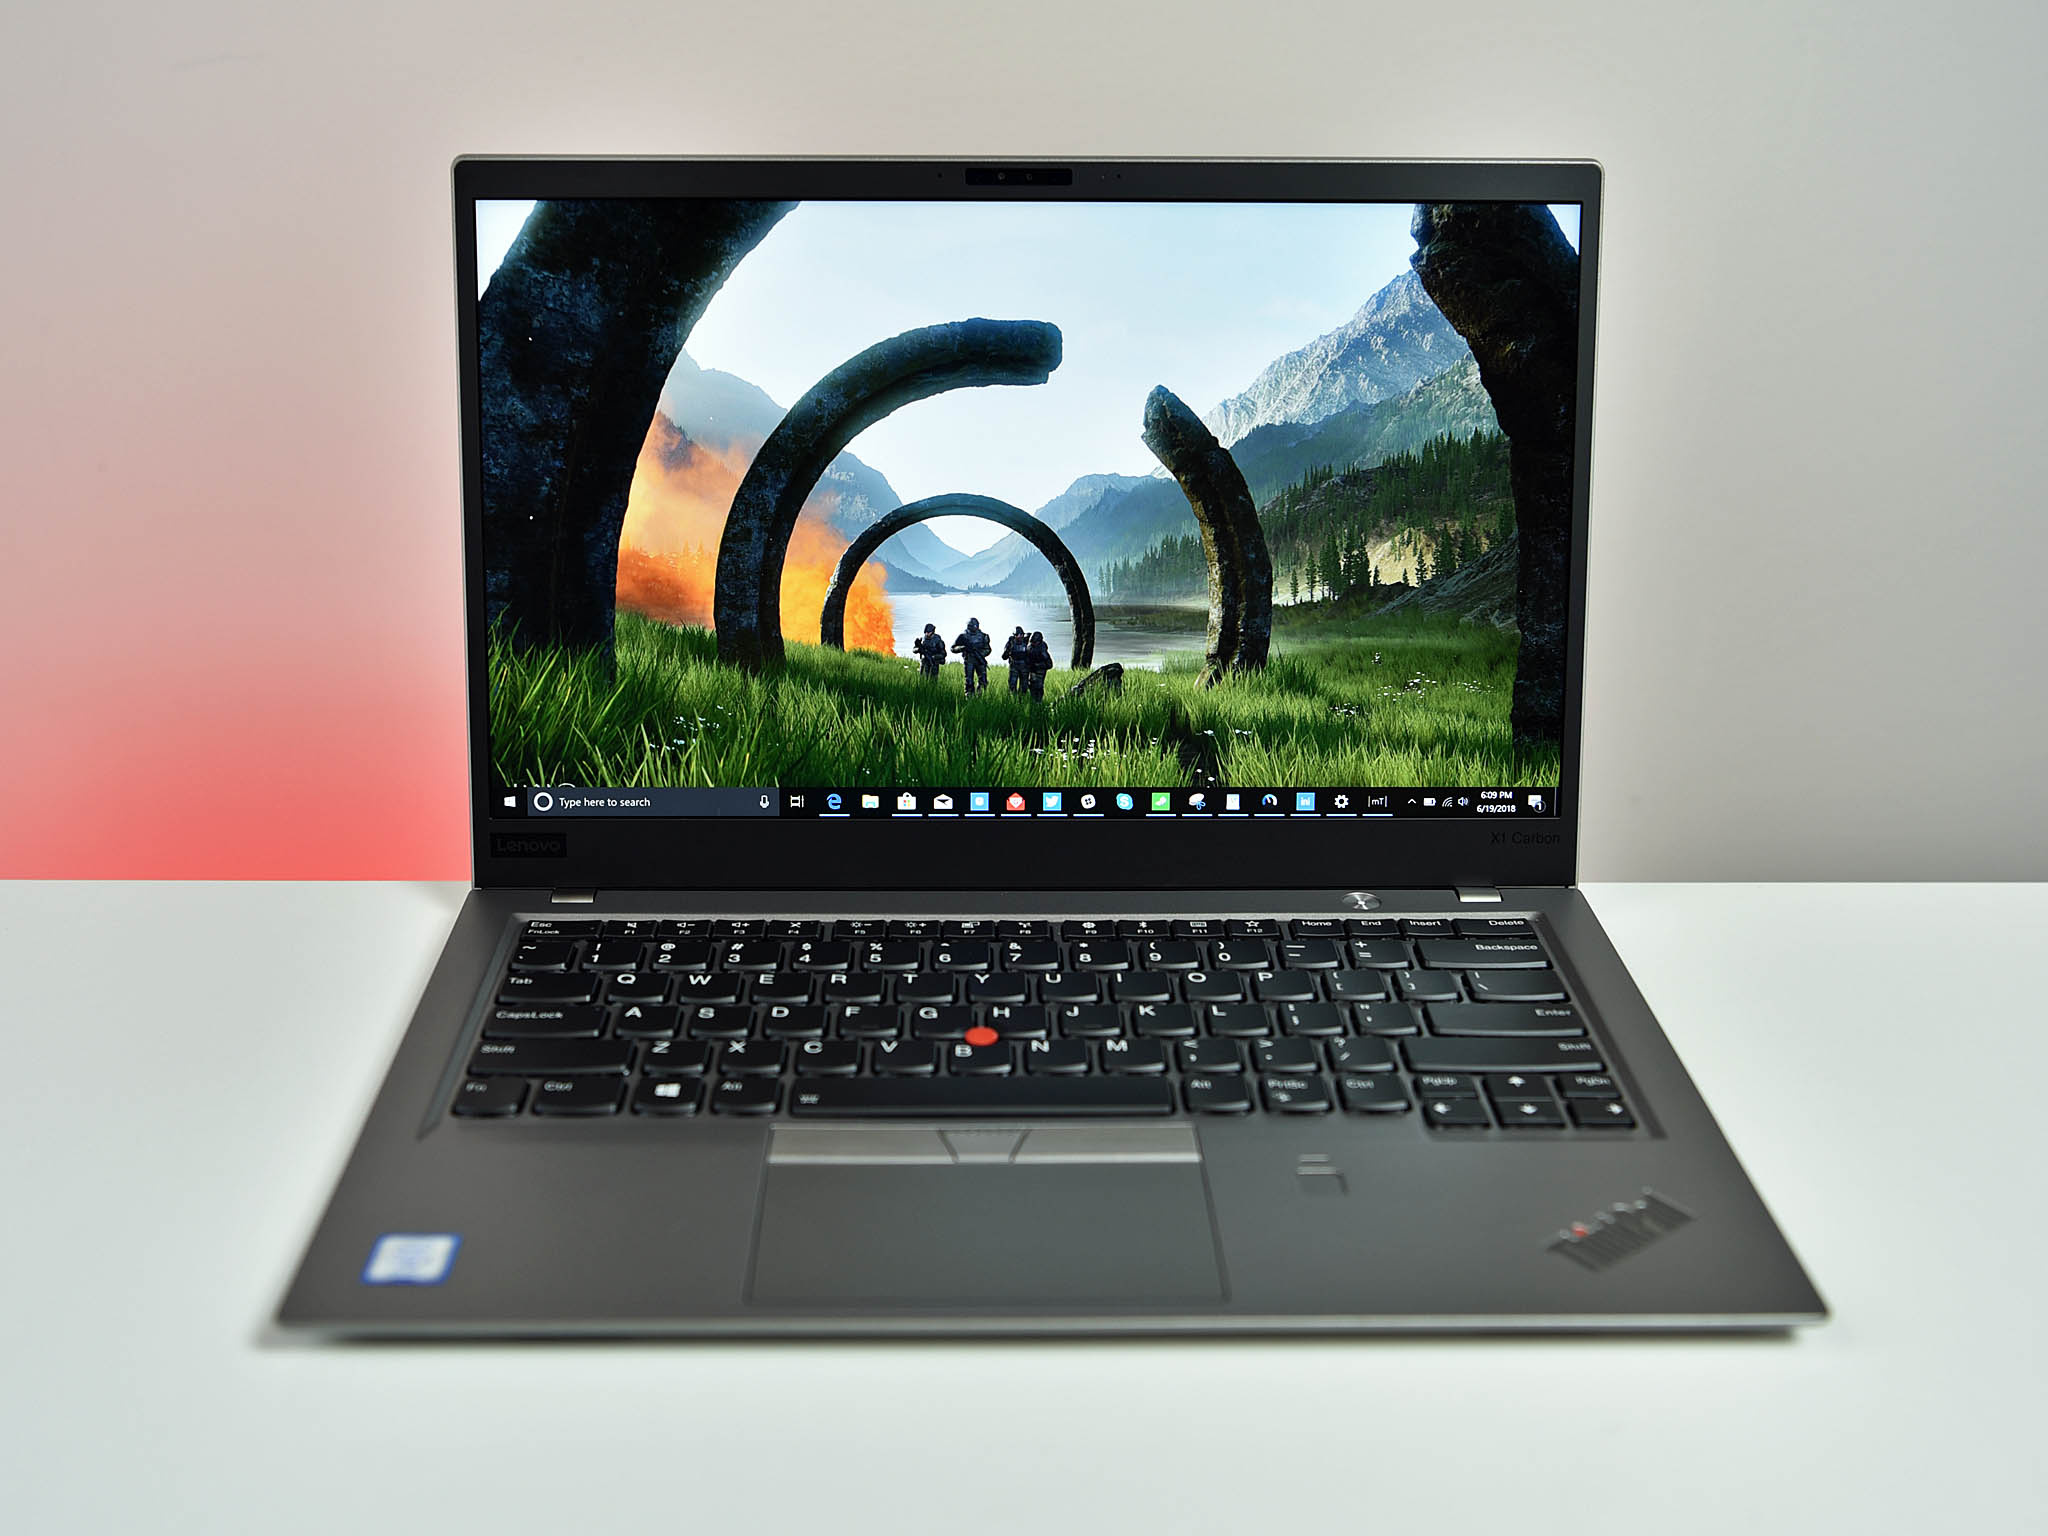 Lenovo ThinkPad X1 Carbon (6th) with LTE: The configuration and 